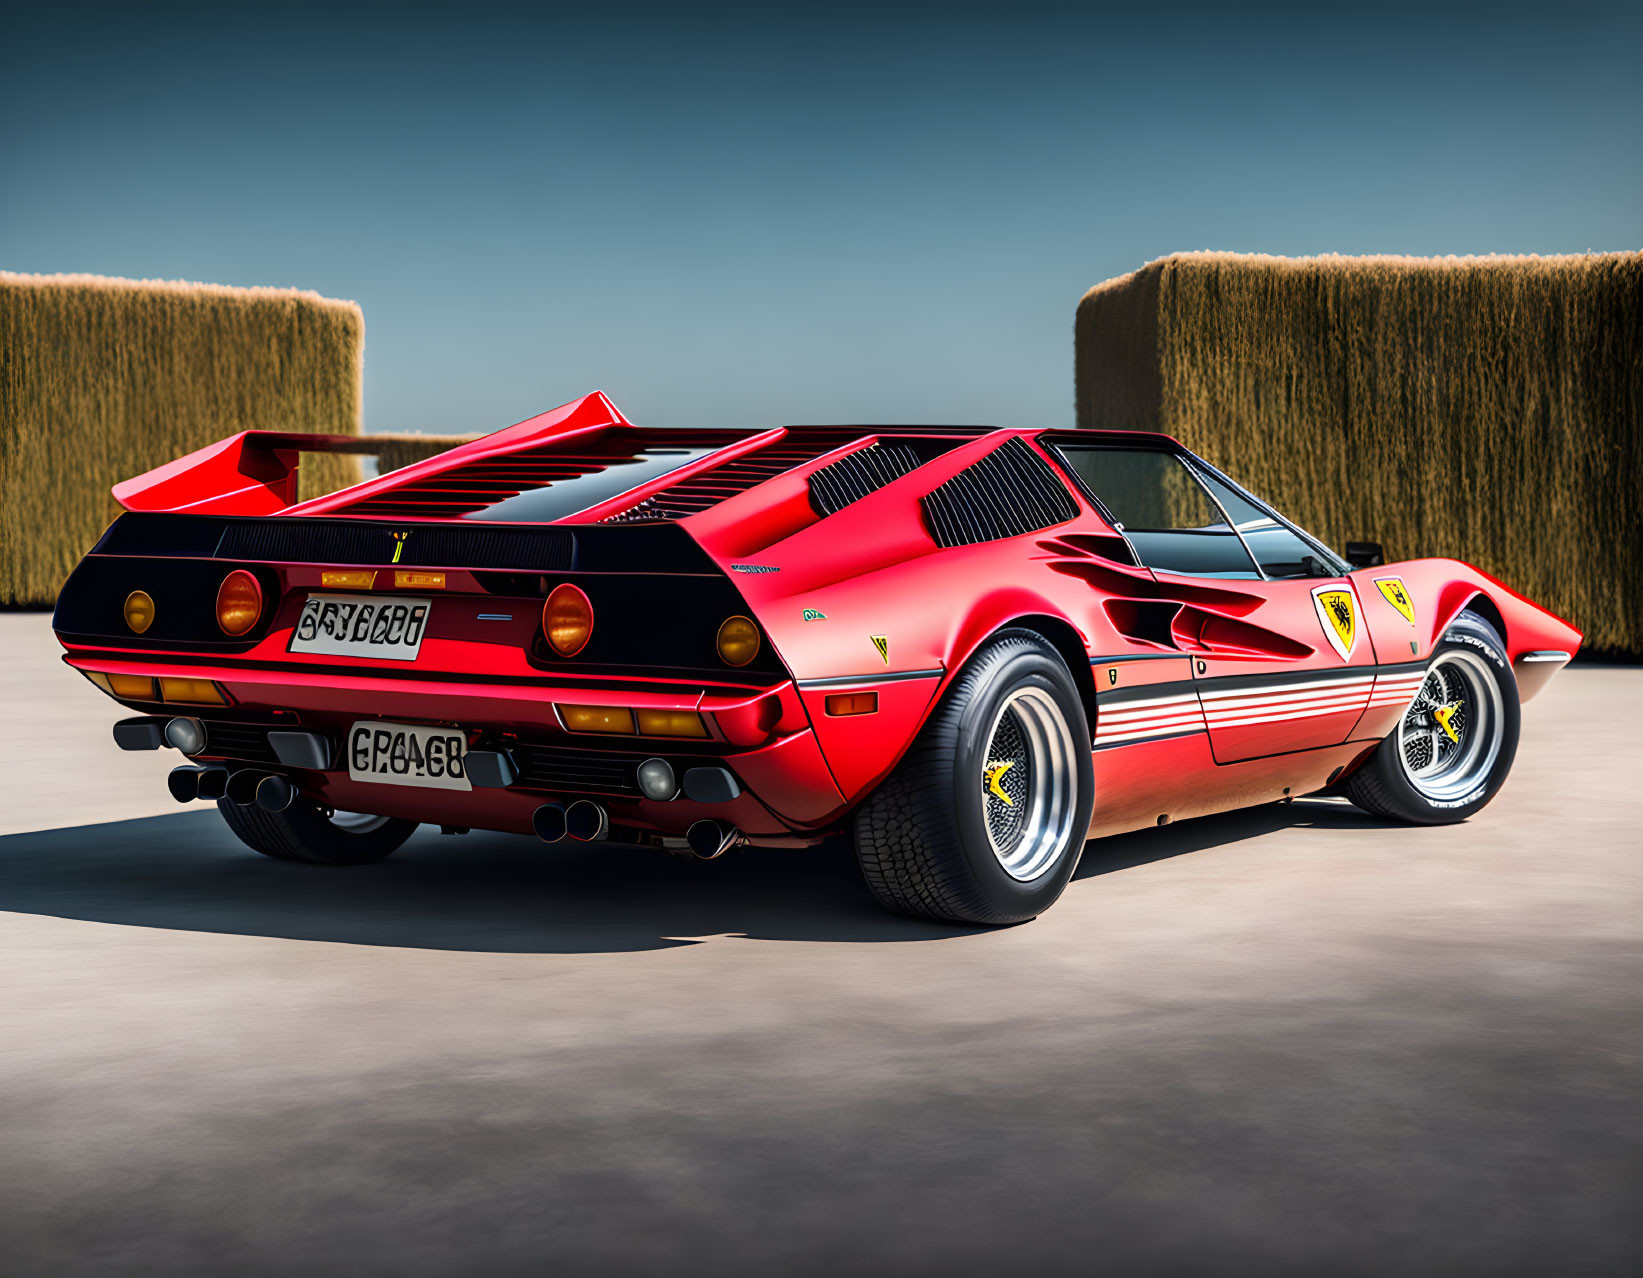 Red Ferrari 288 GTO with rear wing and circular taillights parked against minimalist backdrop with hay